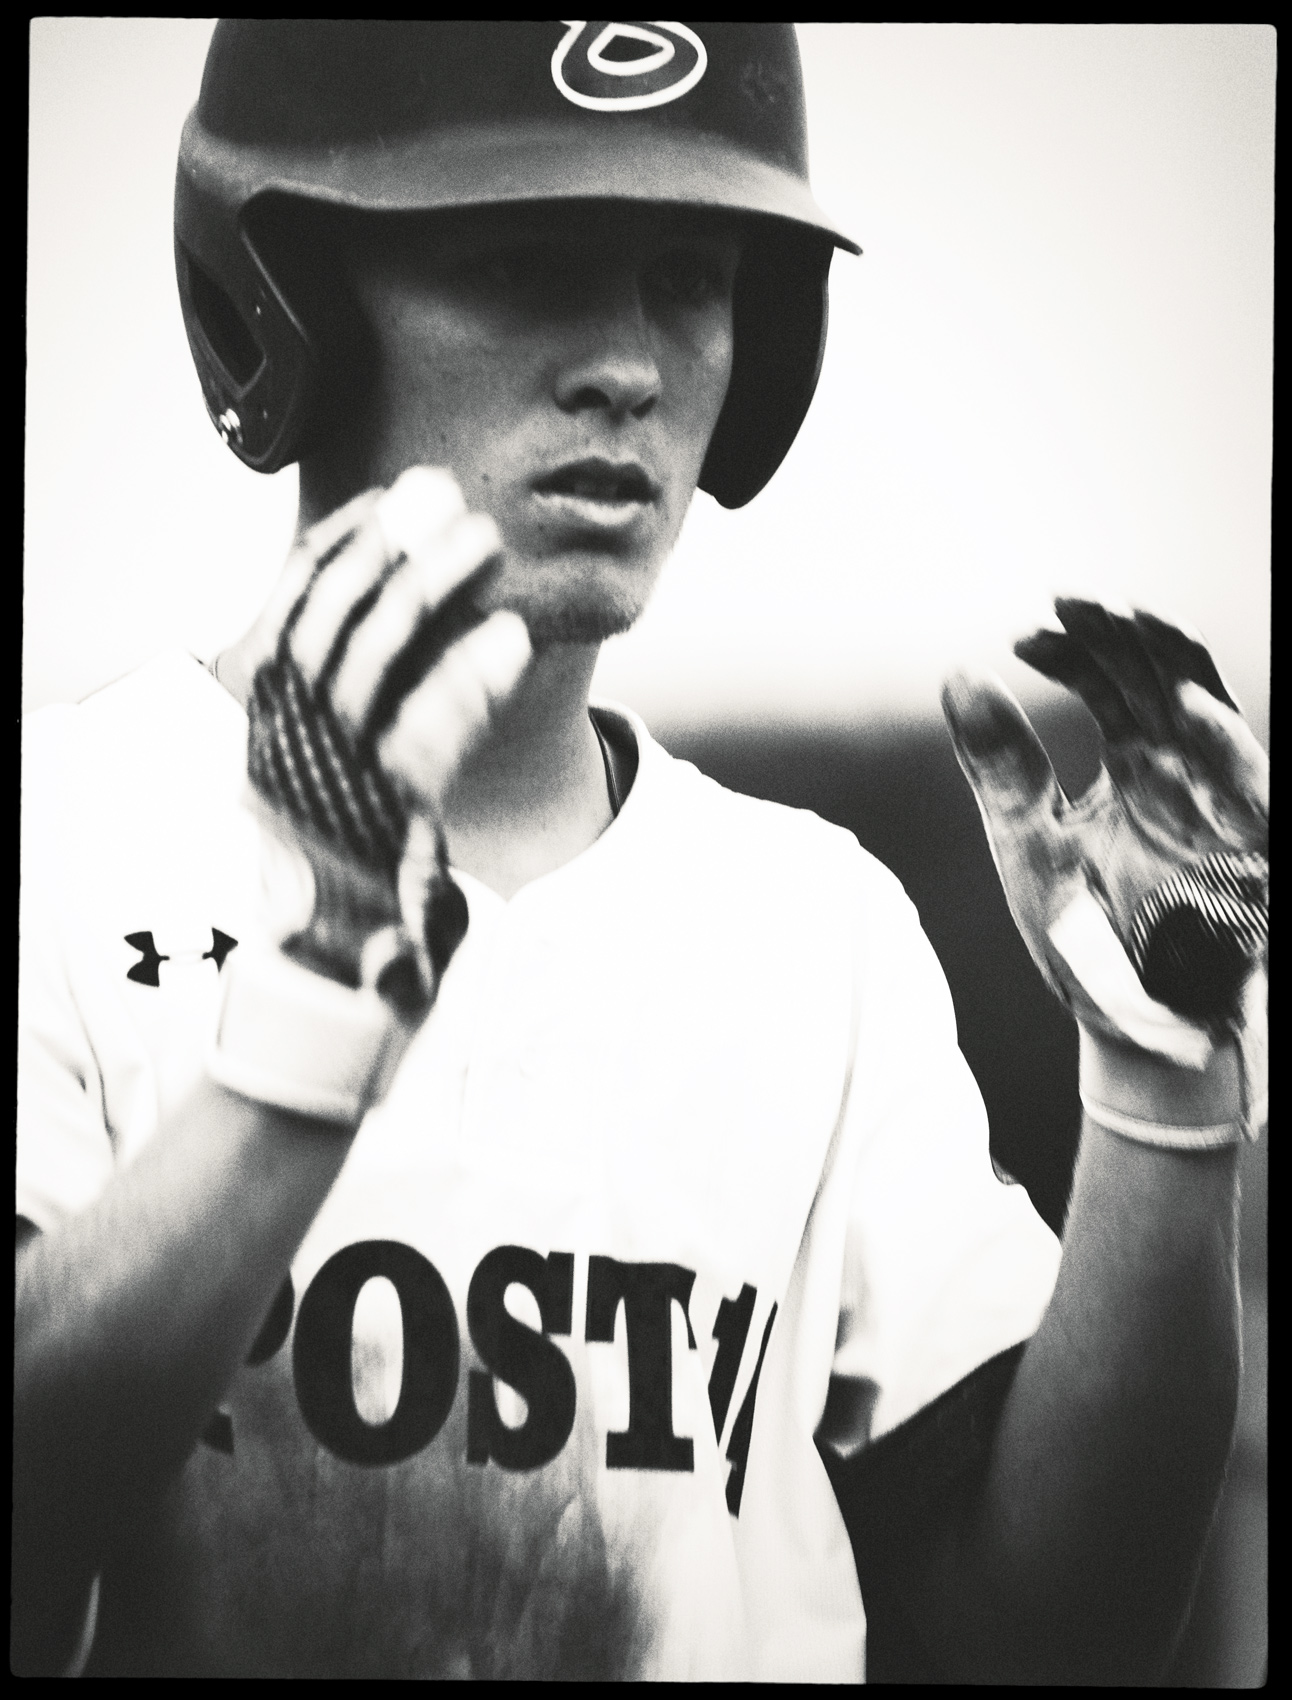 Baseball player with a helmet on in the on-deck circle